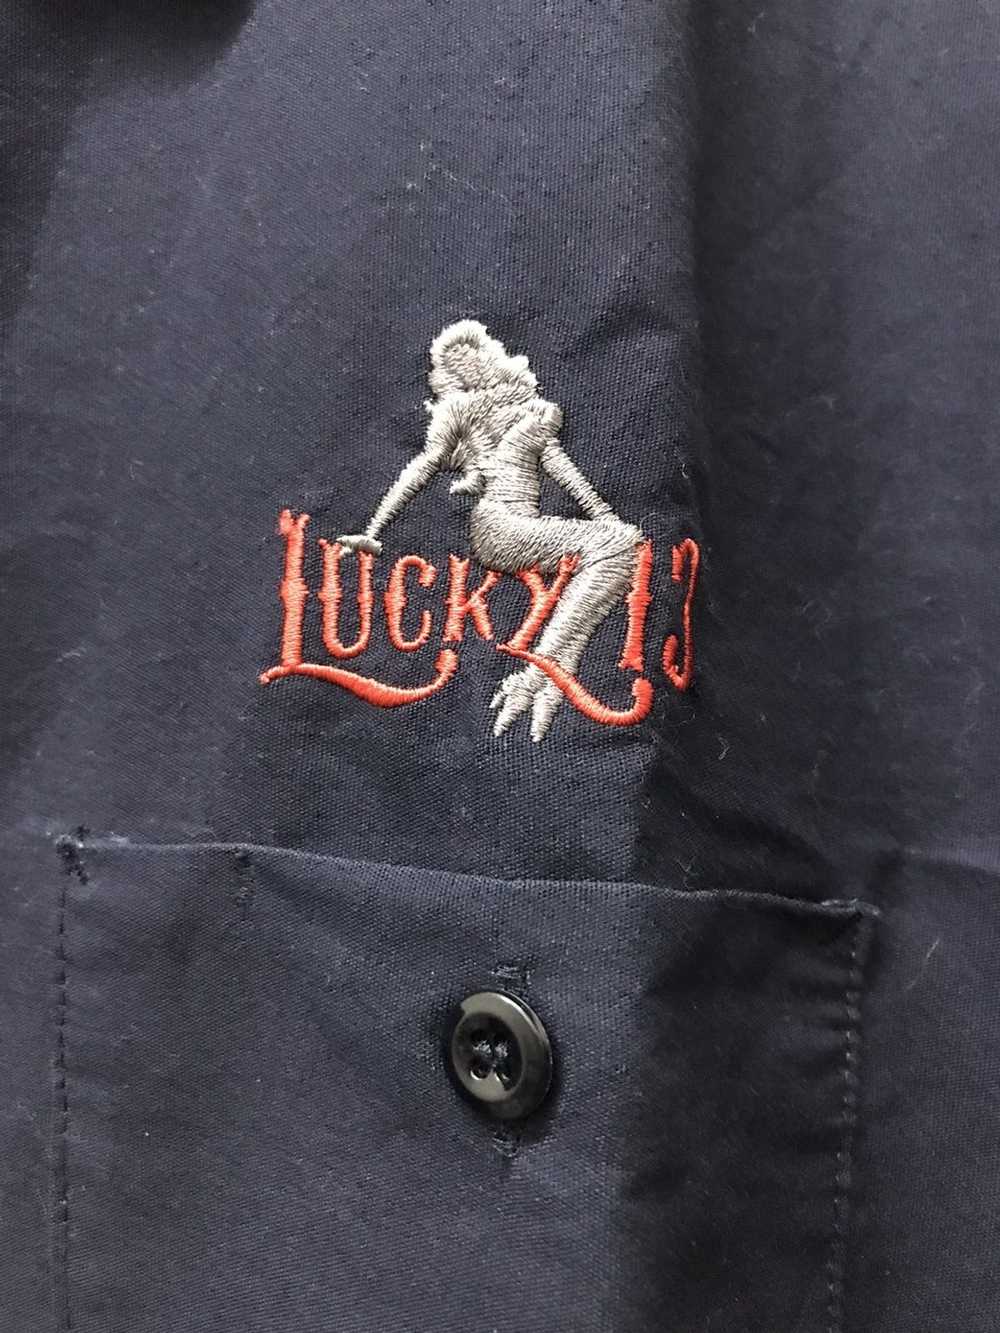 Workers 🔥 LUCKY 13 APPAREL Workwear Shirt - image 5